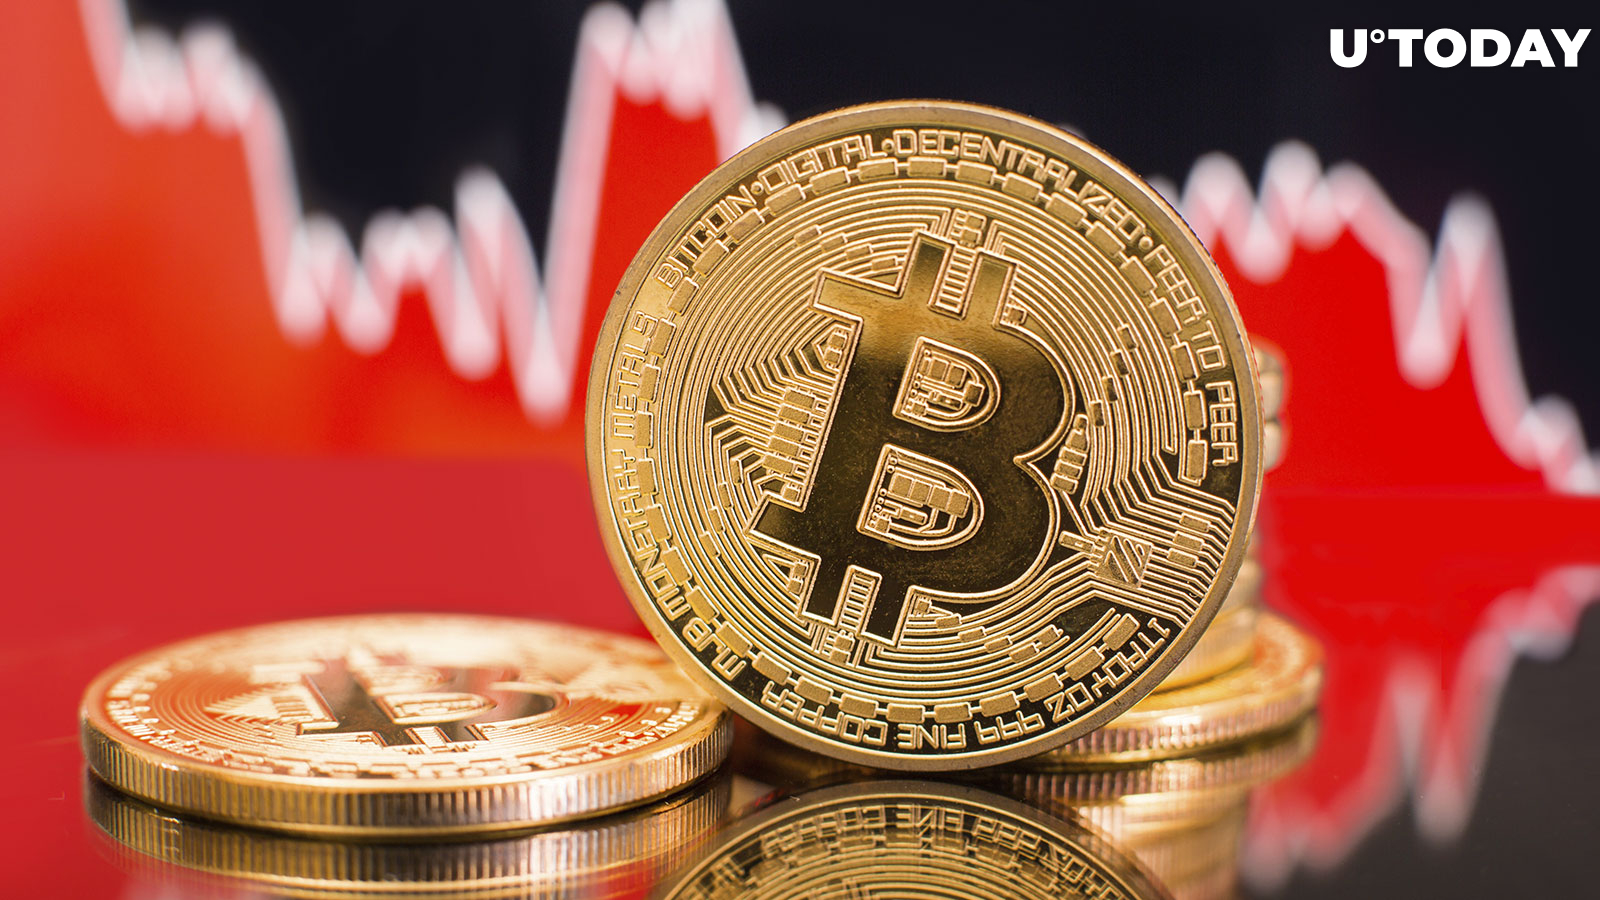 Bitcoin Extends Losses as Genesis's Lending Arm Halts Withdrawals